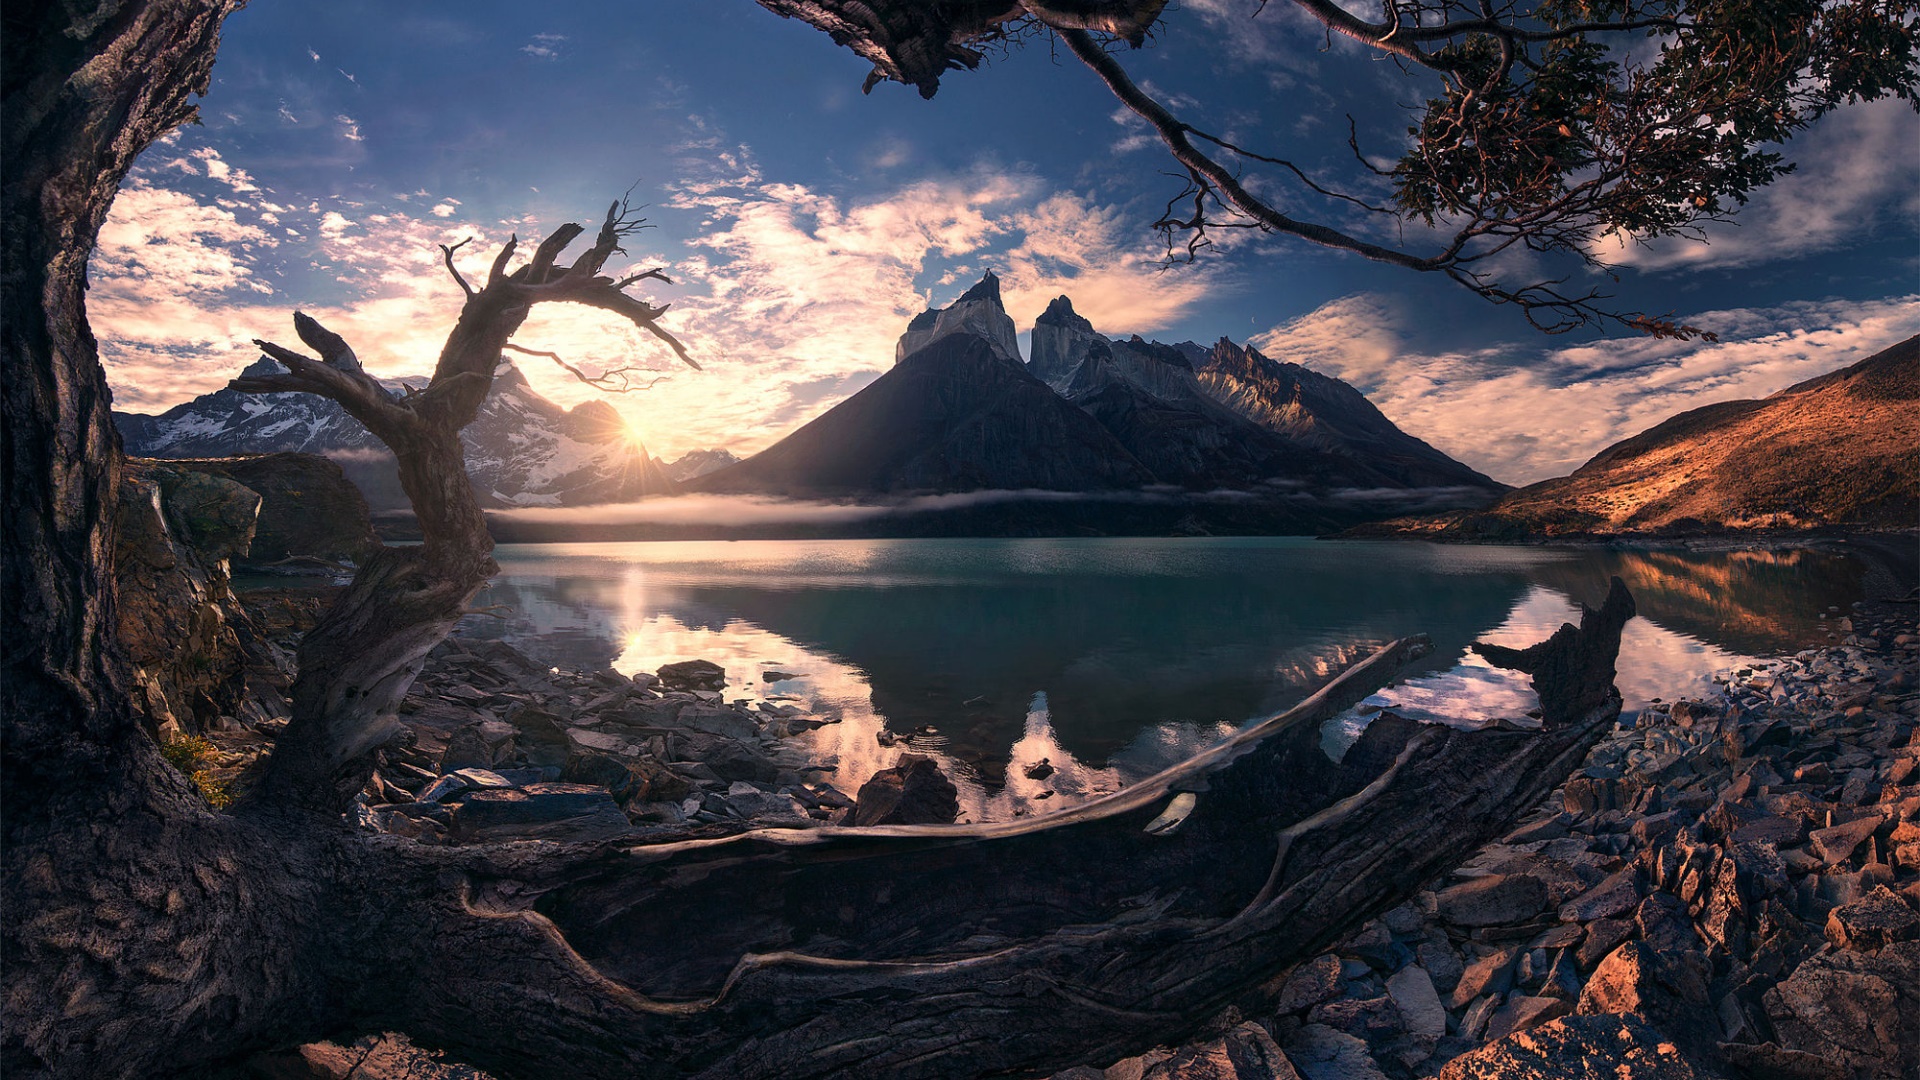 Torres del Paine National Park, Chile - backiee